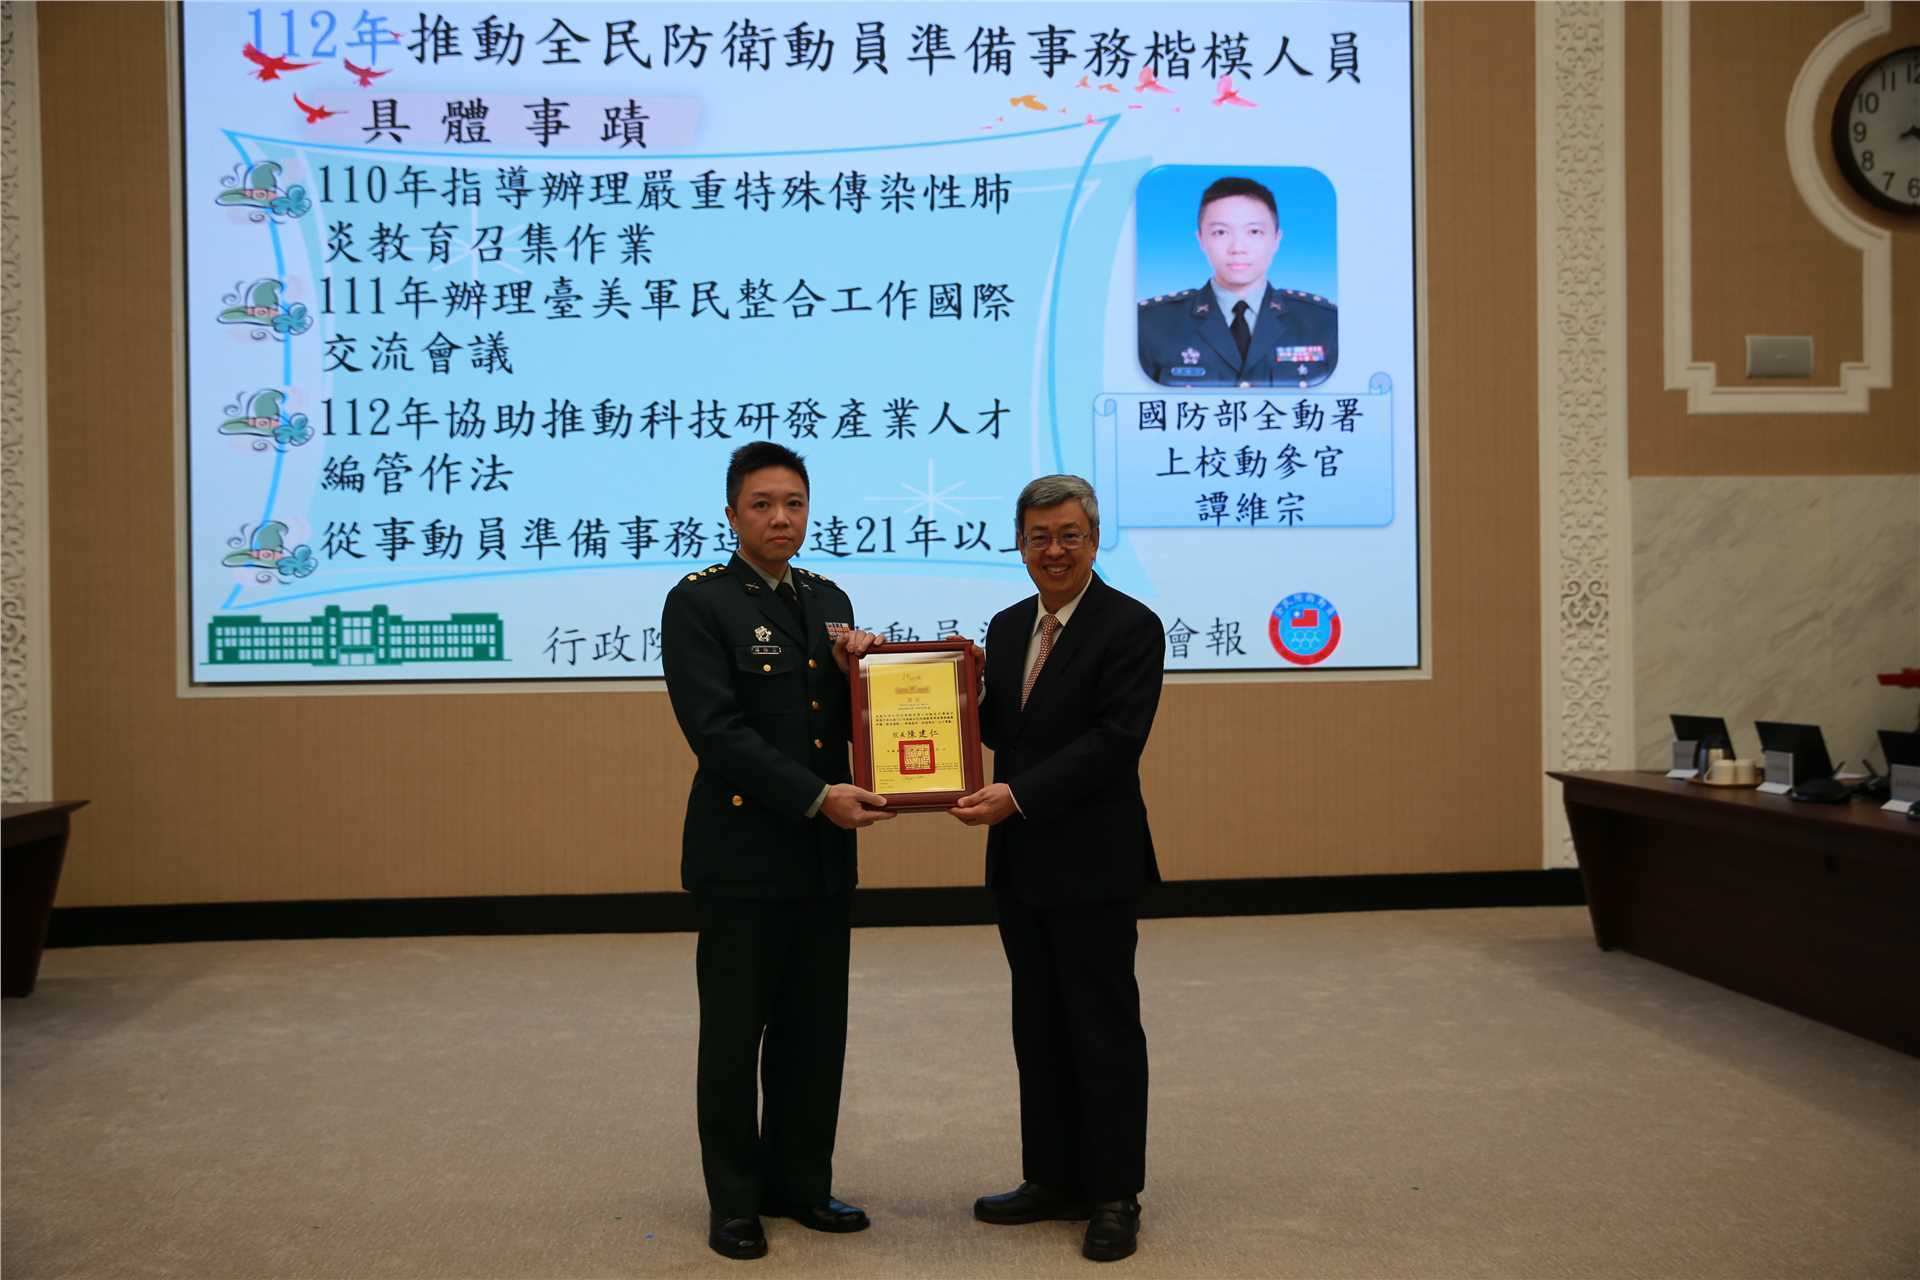 President Chen of the Executive Yuan presented the mobilization model certificate.